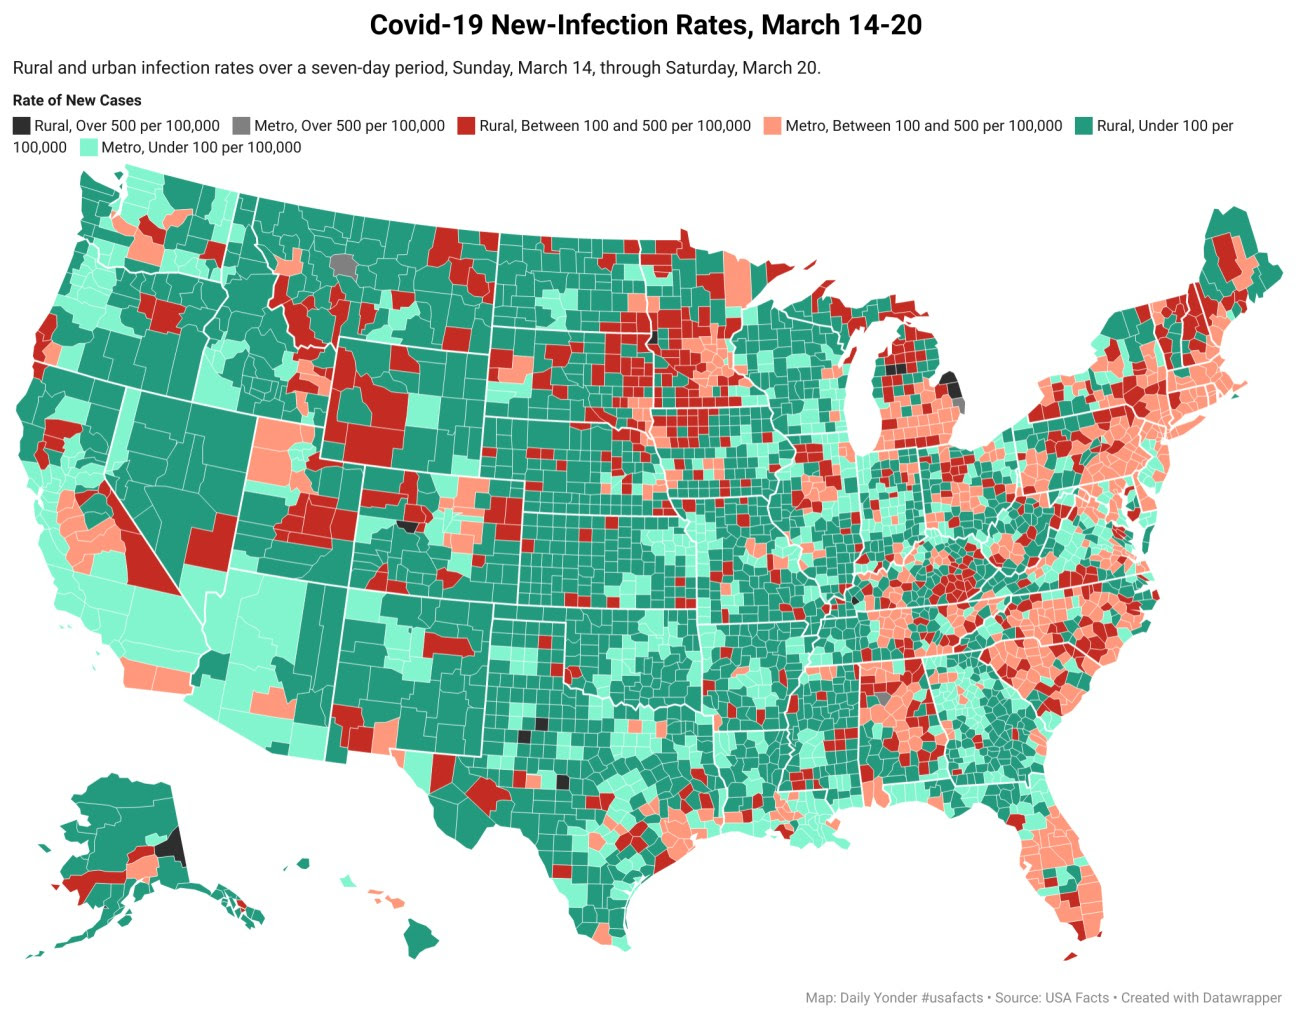 LEDE-covid-19-new-infection-rates-march-14-20-nbsp--1296x1019.jpg